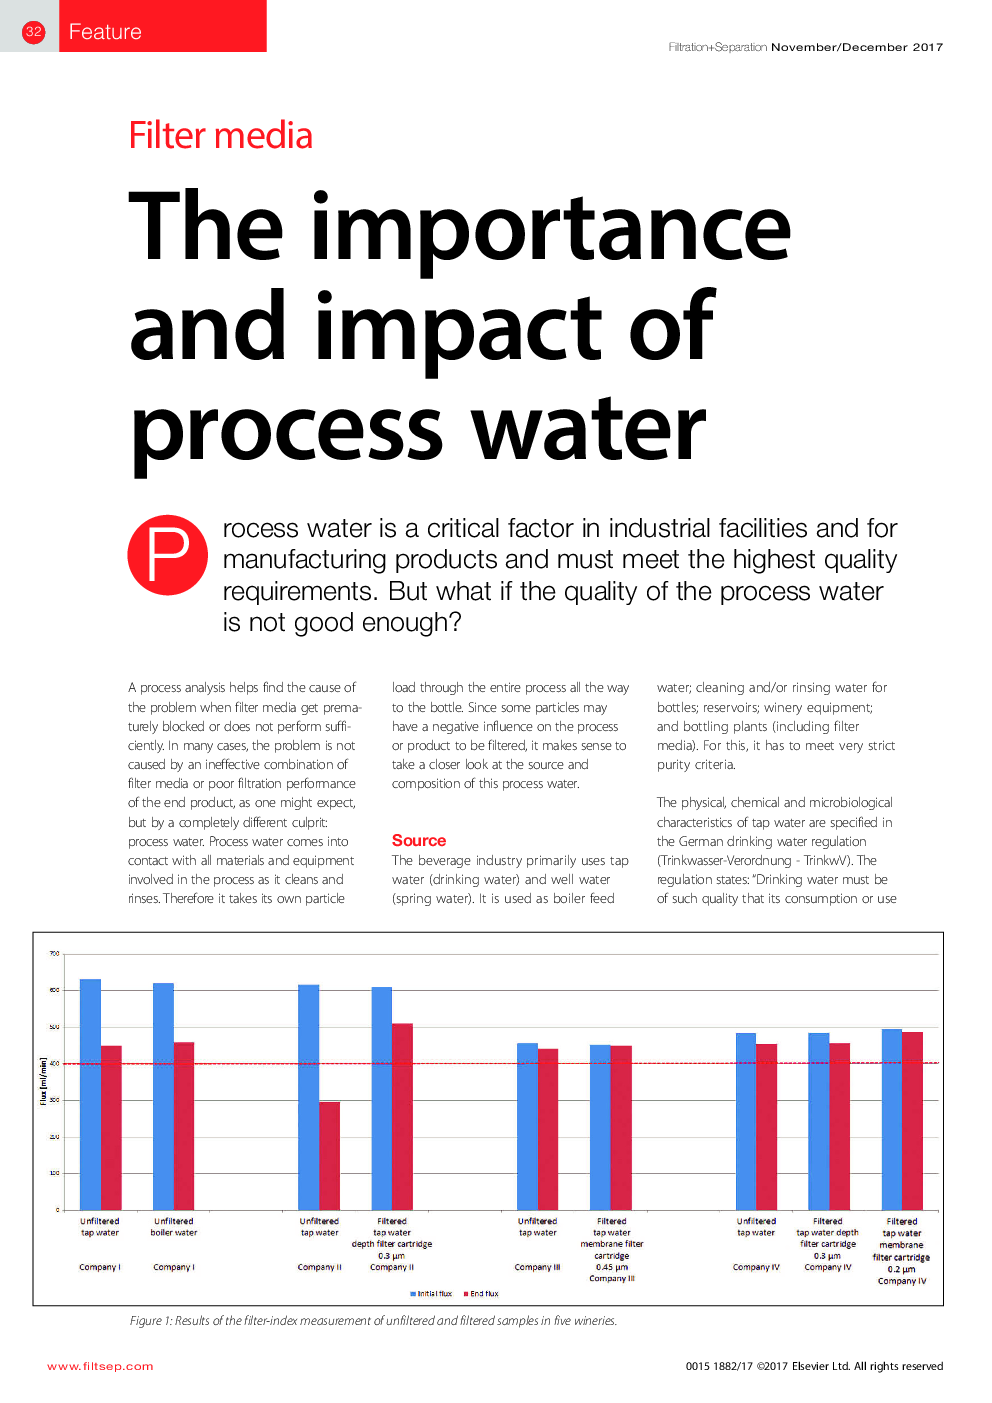 The importance and impact of process water